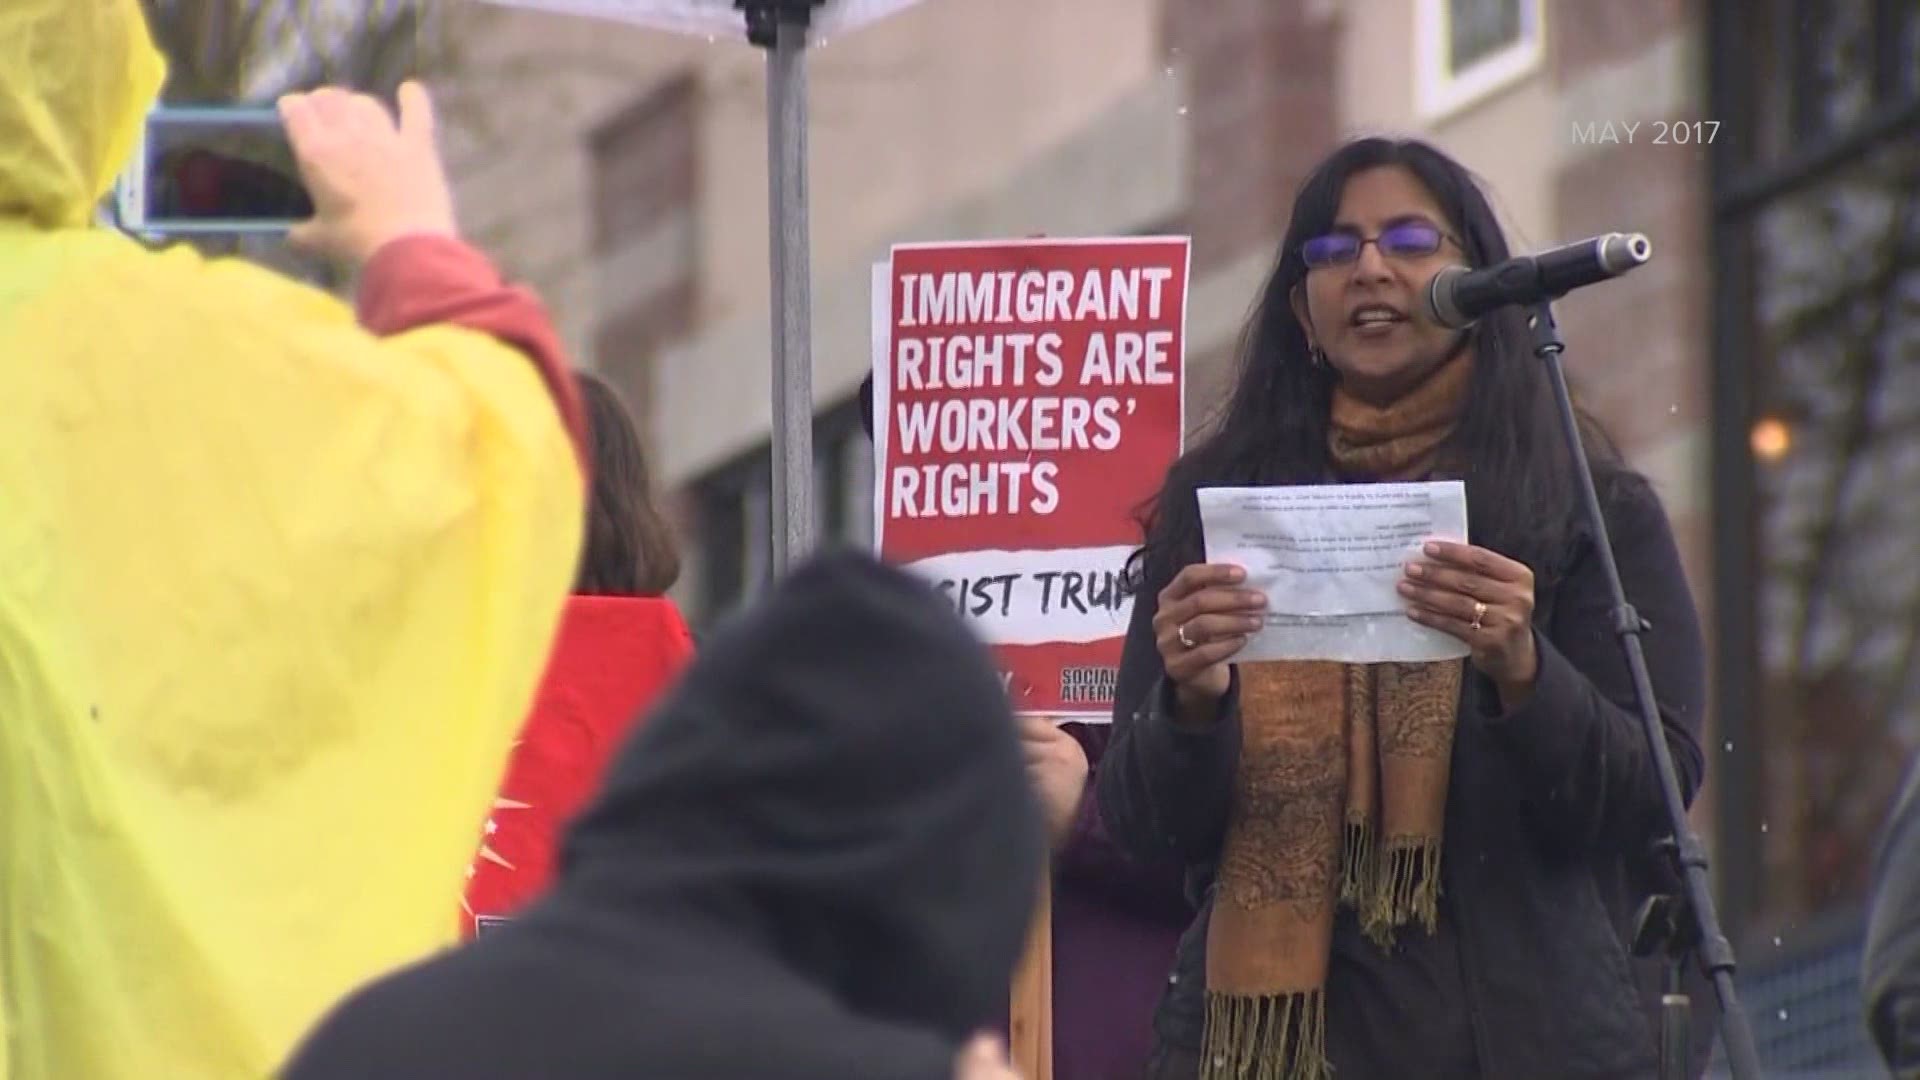 Sawant is being accused of violating her role as a council member during the height of Seattle protests.